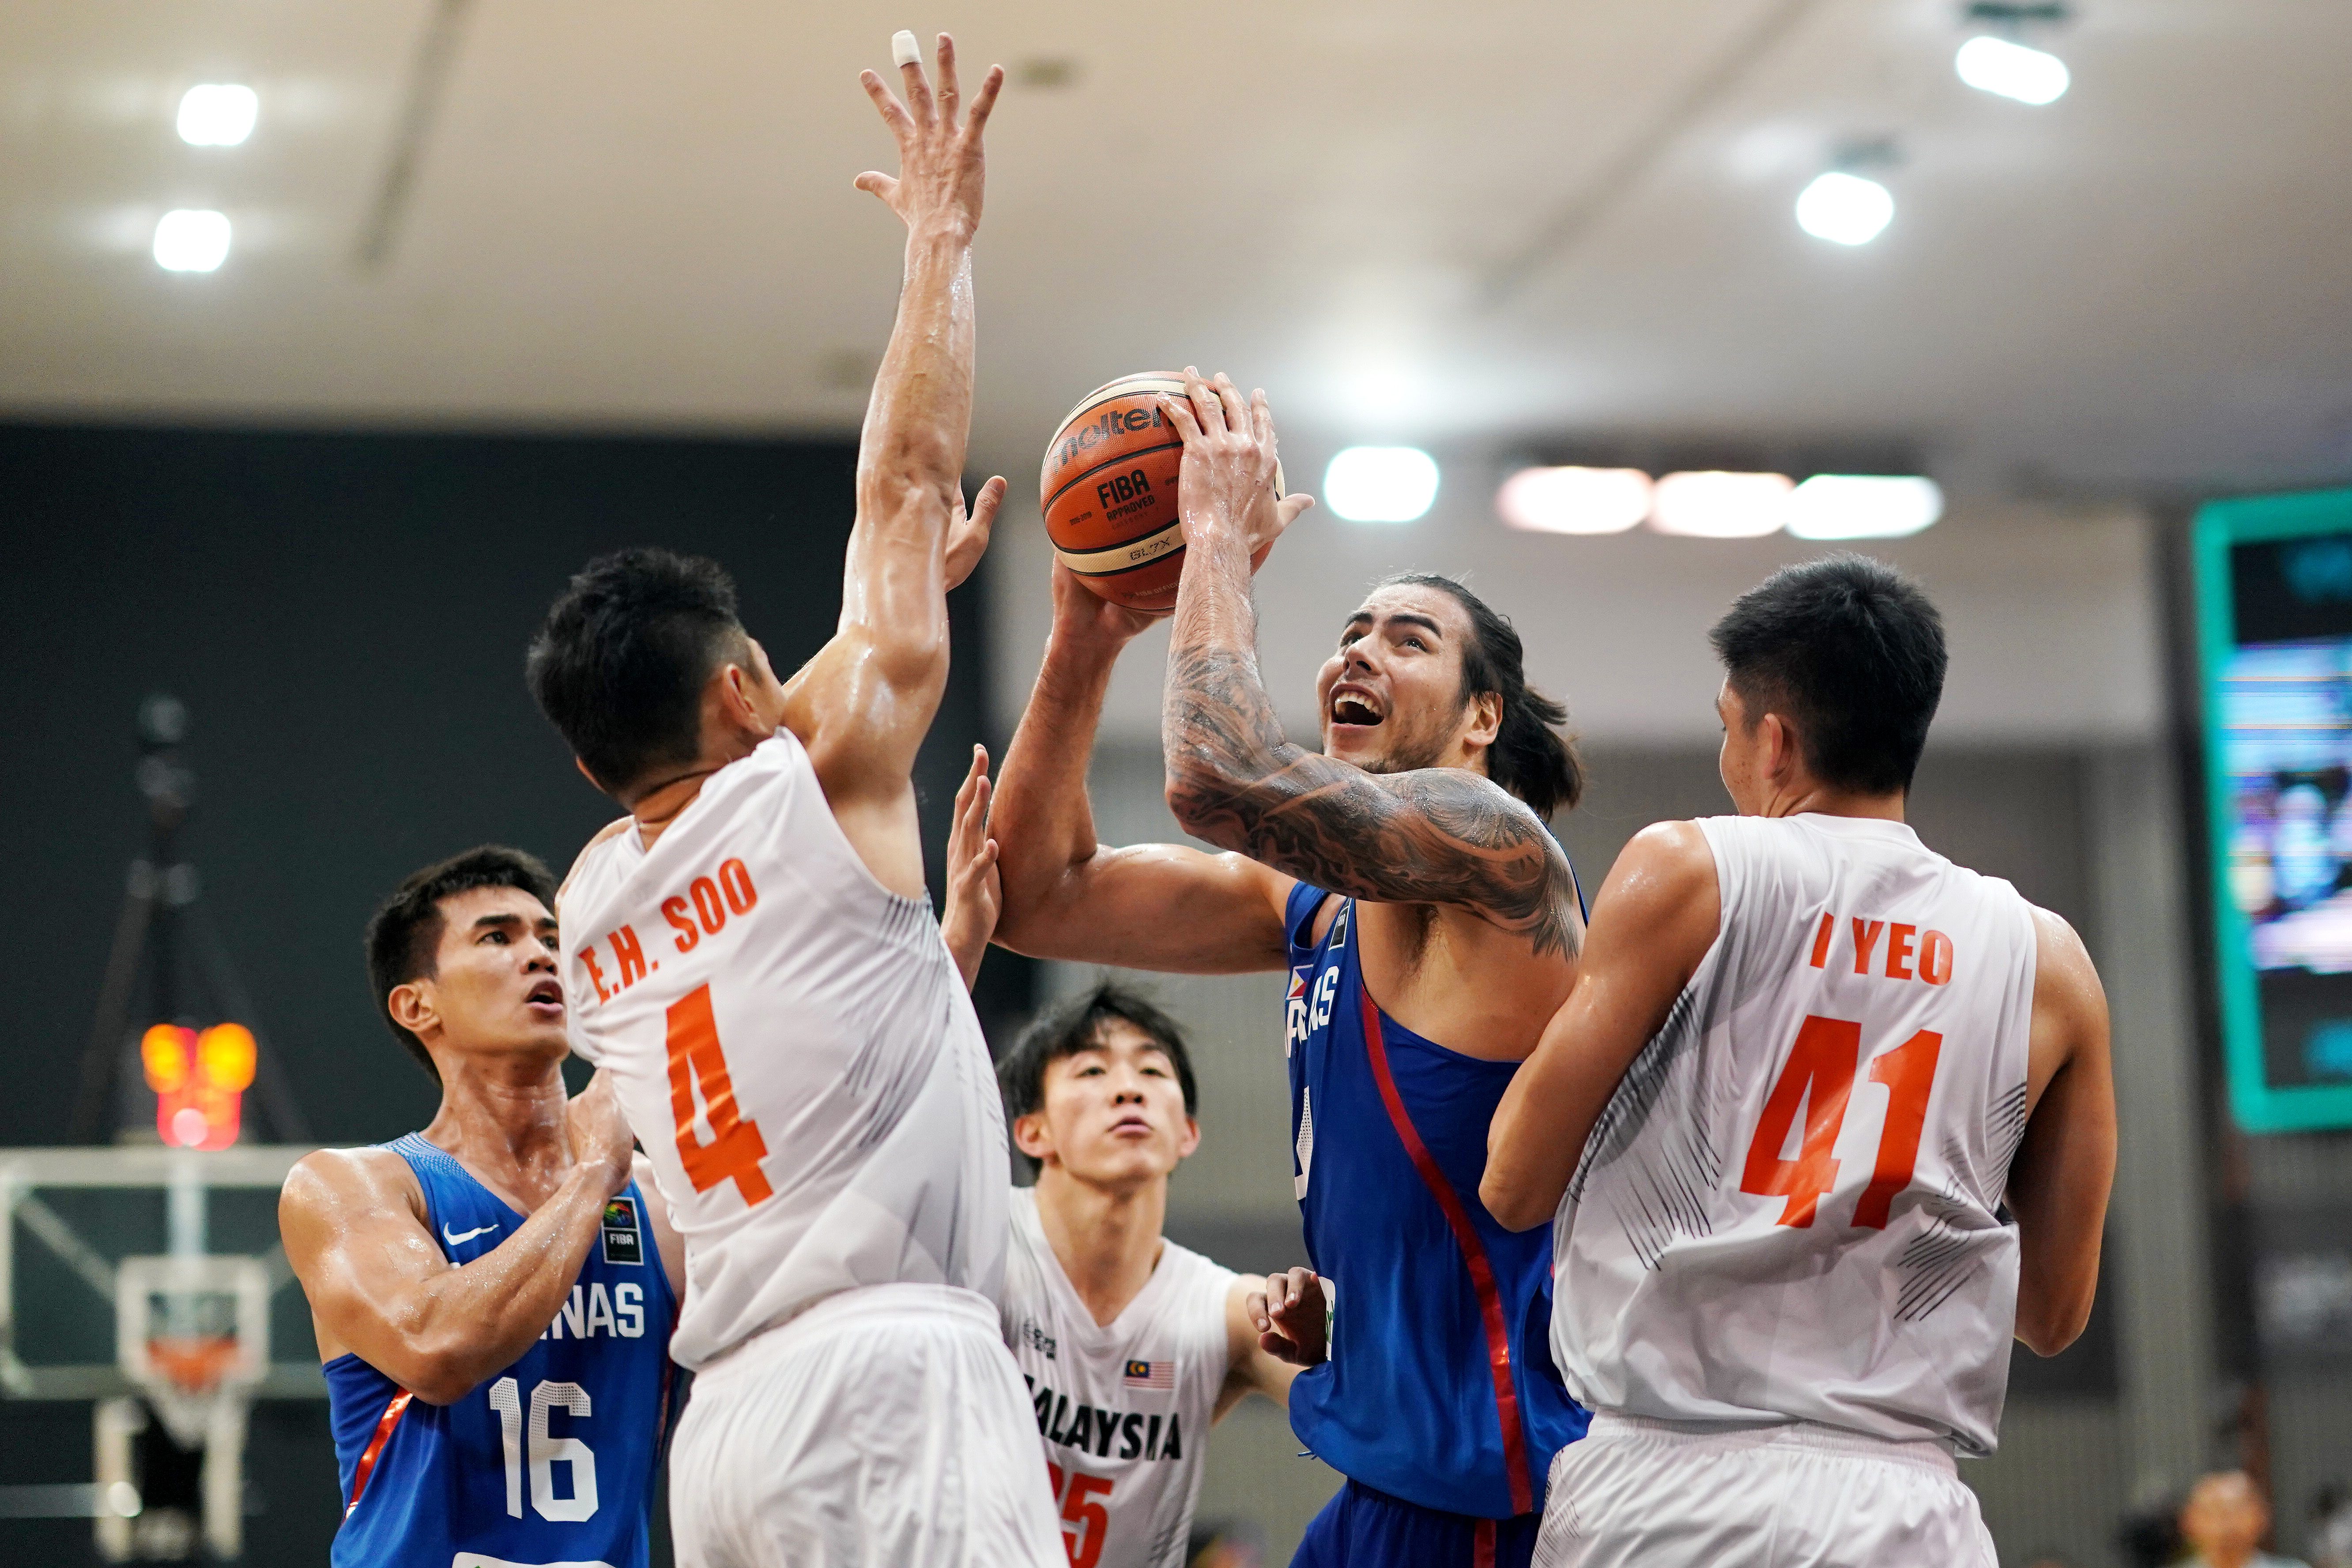 Christian Standhardinger makes his move close to the rim. Photo by PSC-POC media 